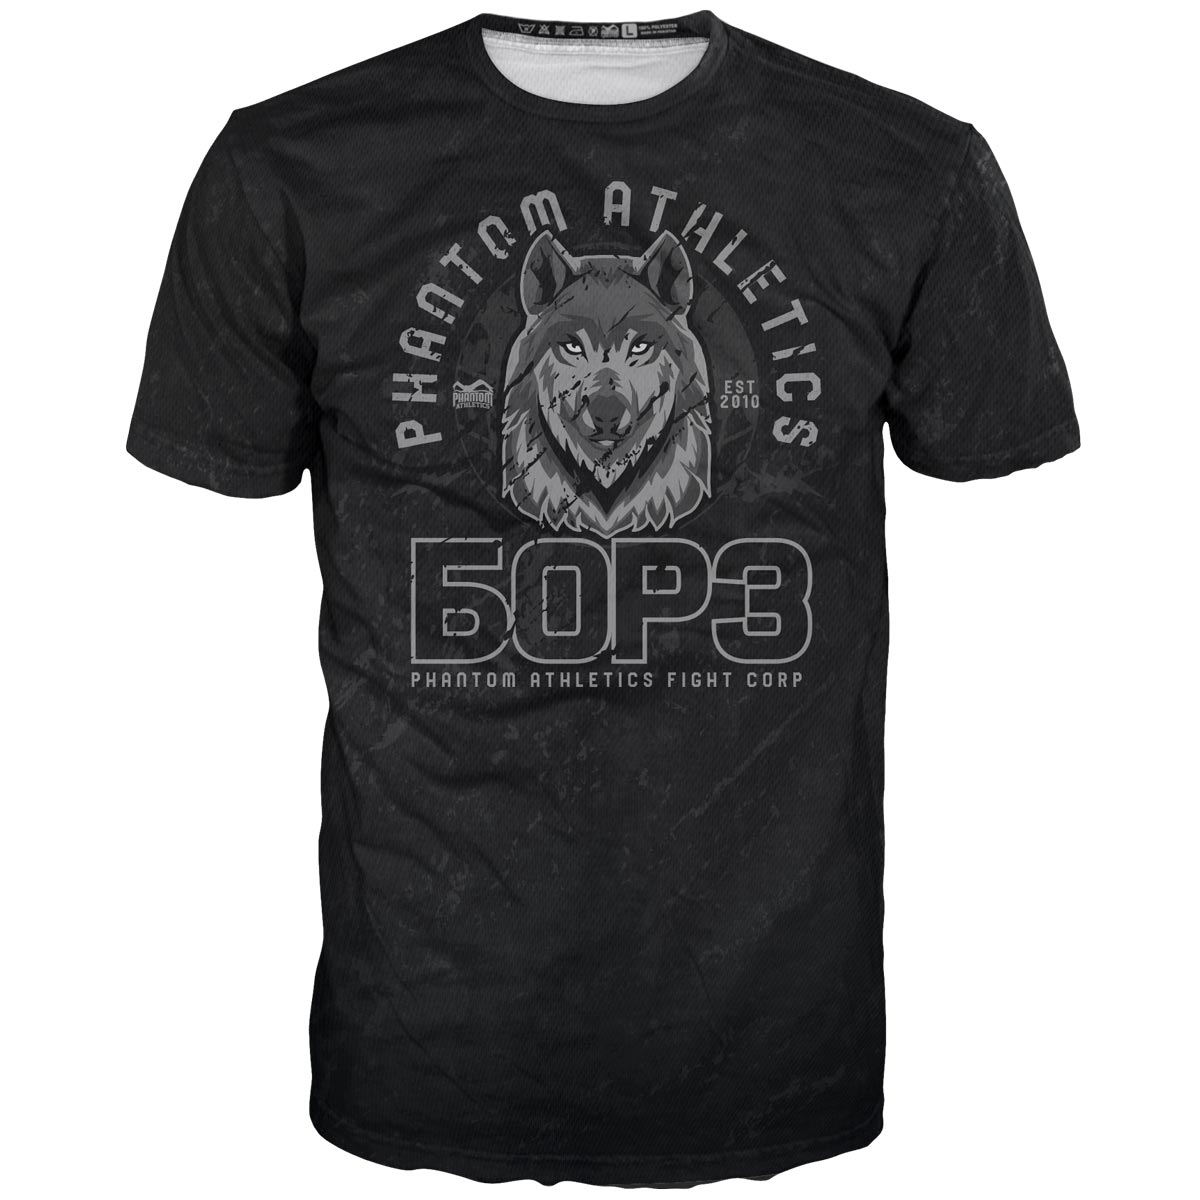 Phantom BORZ БОРЗ EVO shirt. The ideal training shirt for your martial arts. In Chechnya wolf design with Russian WOLF lettering. Perfect for MMA, Muay Thai, kickboxing, wrestling and grappling.